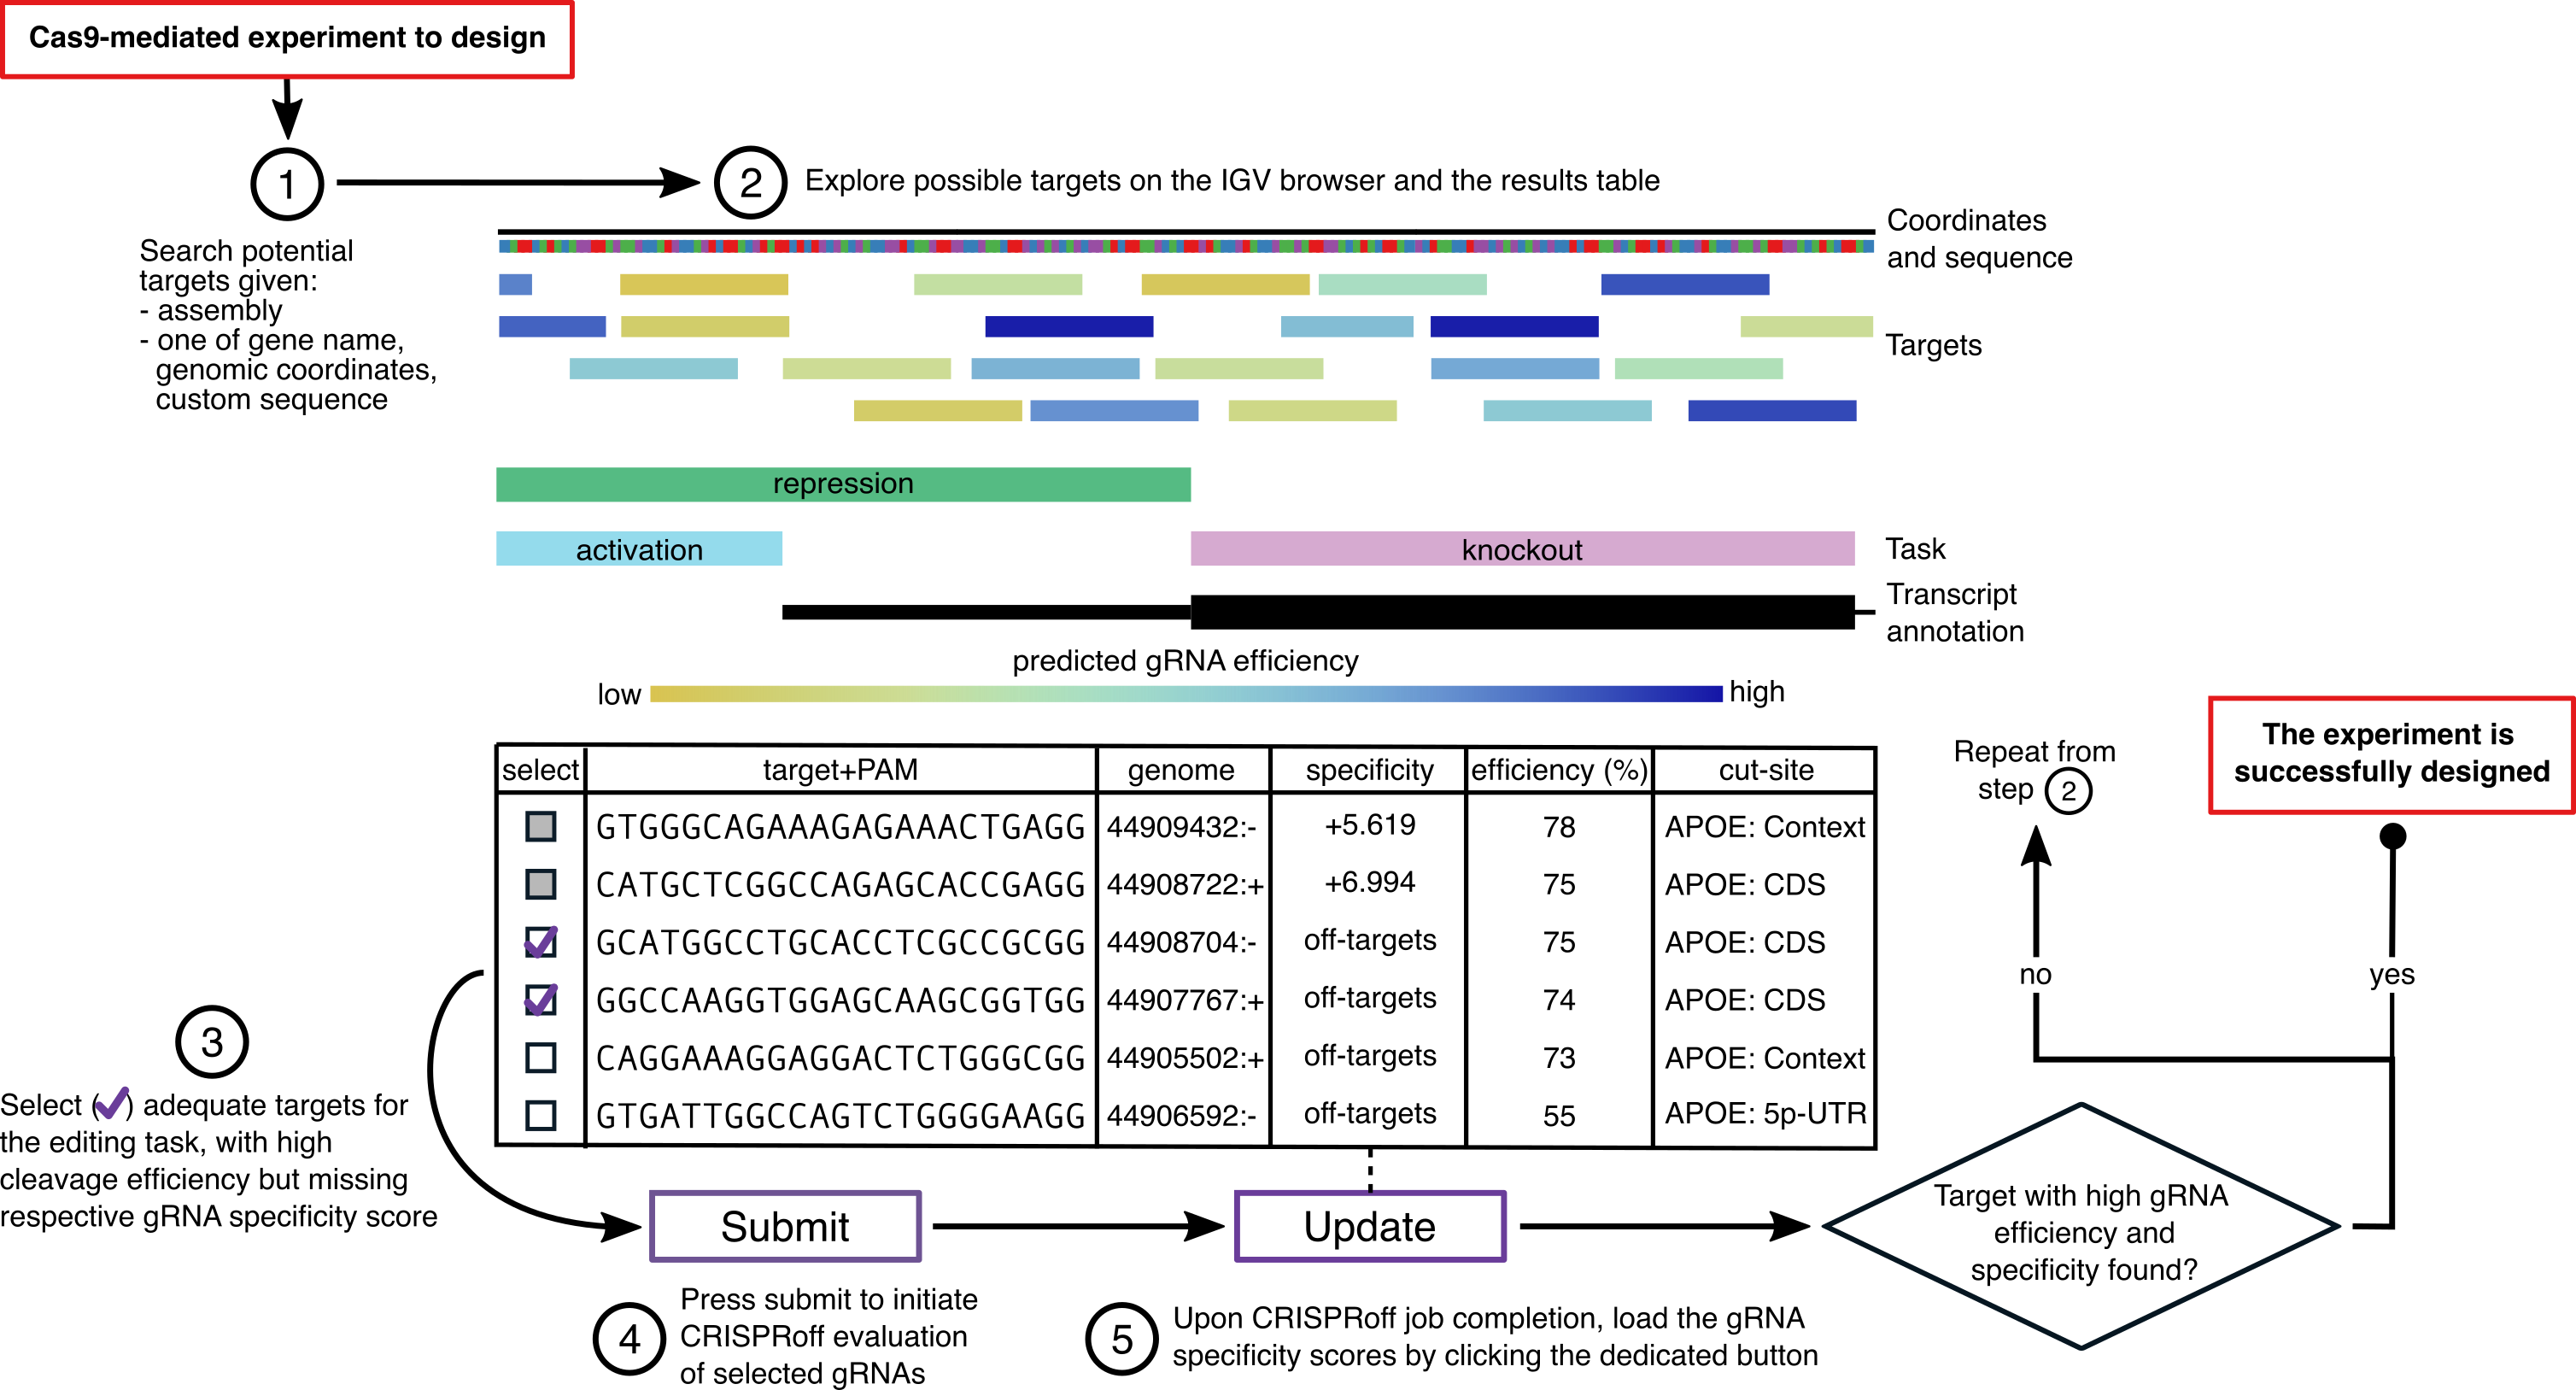 Steps to design gRNAs (maximize efficiency and specificity)